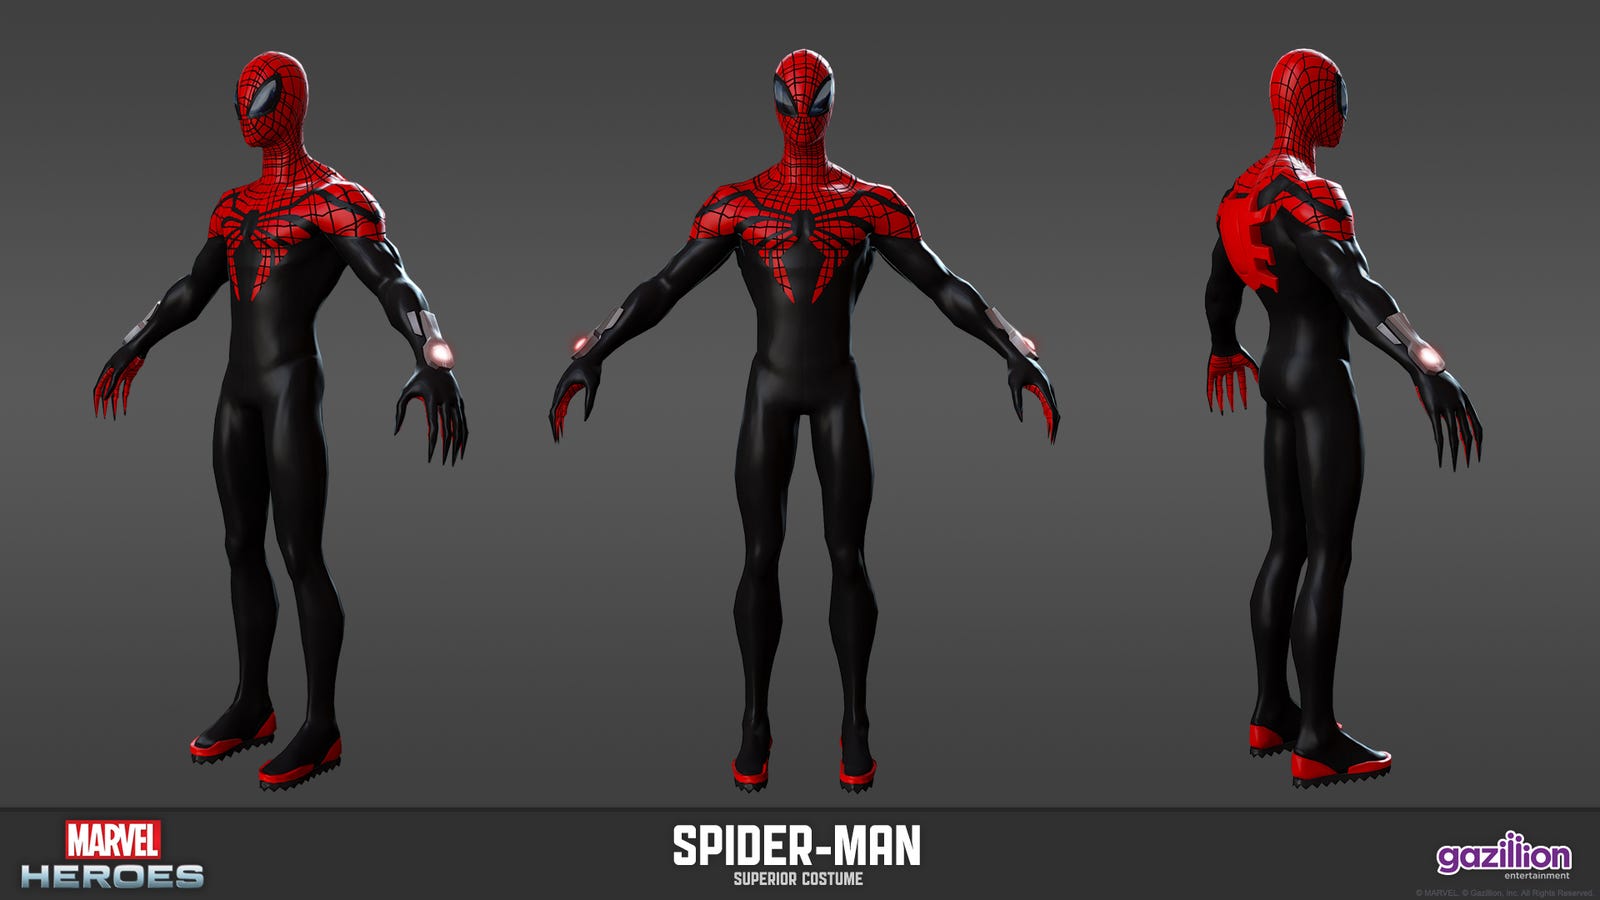 Dress Up as the Most Evil Spider-Man This August in Marvel Heroes